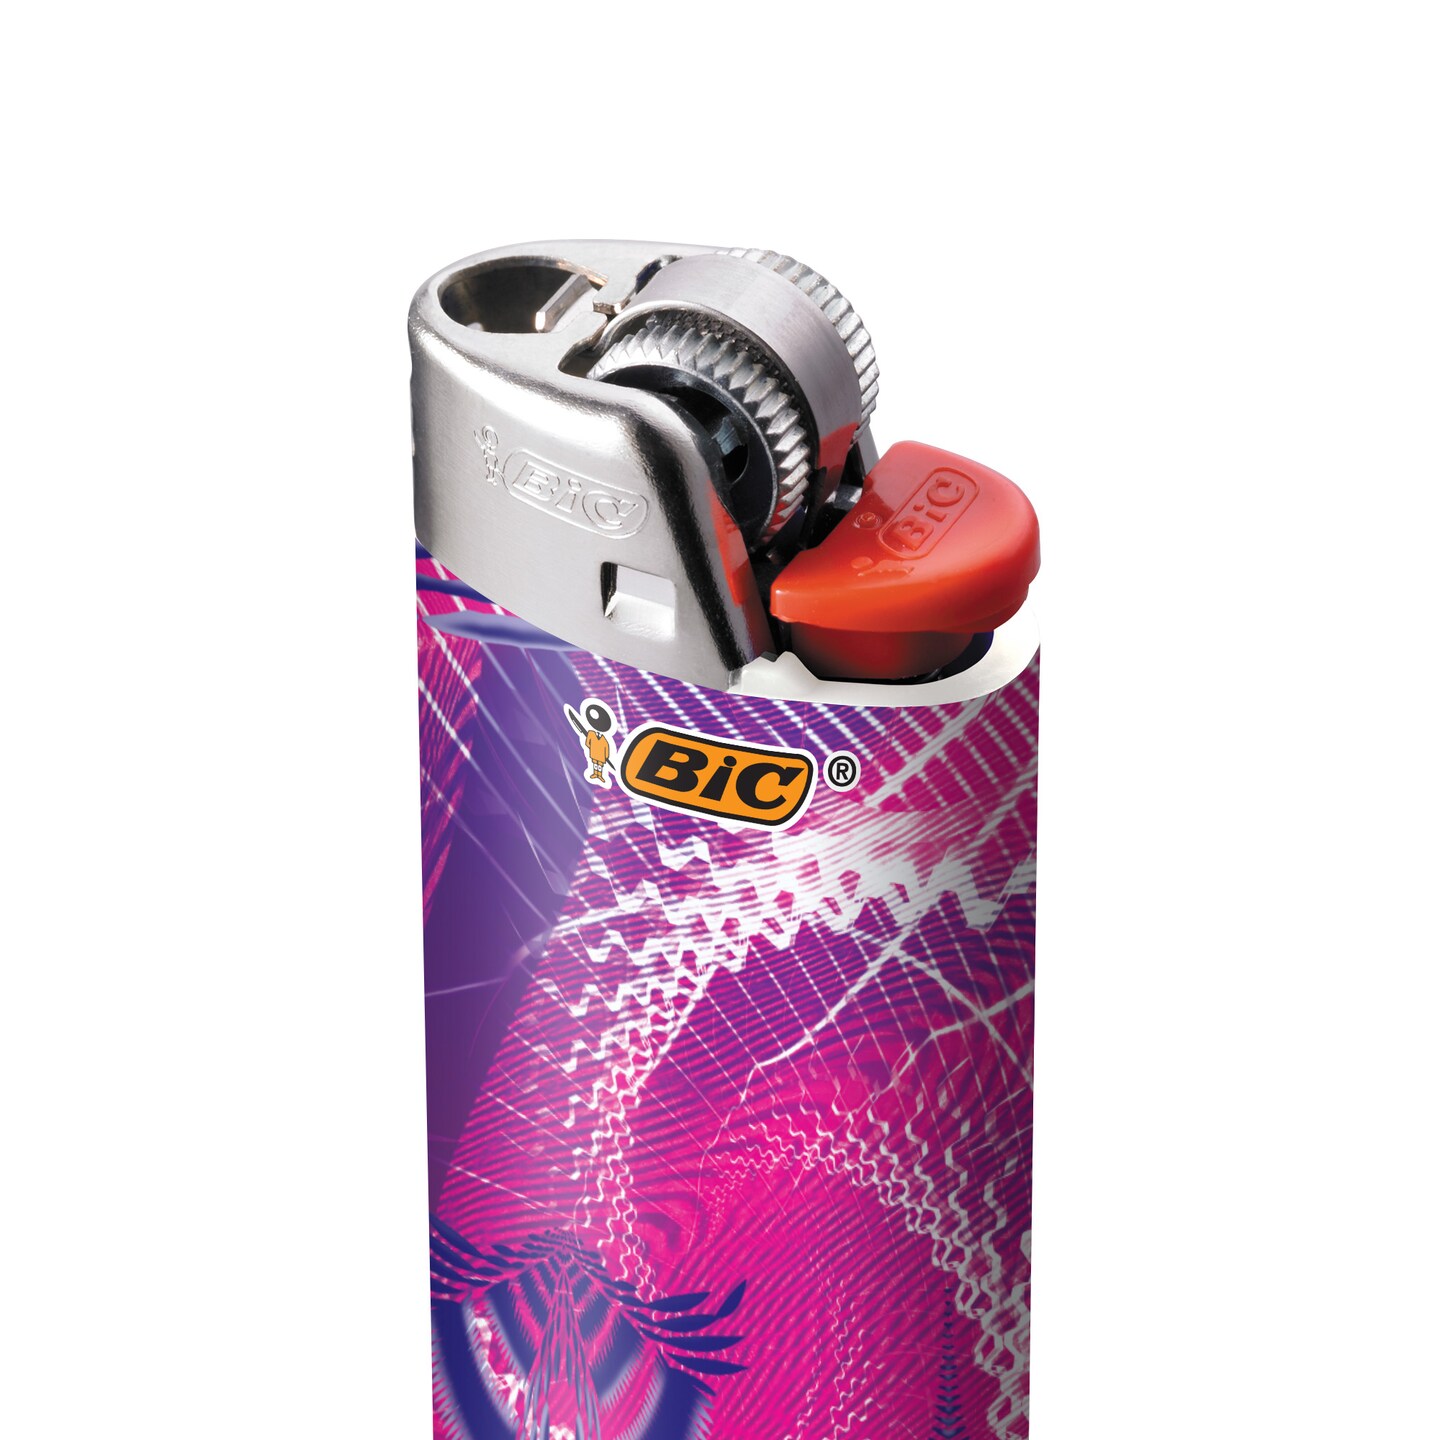 BIC Maxi Pocket Lighter, Special Edition Prismatic Collection, Assorted Unique Lighter Designs, 50 Count Tray of Lighters